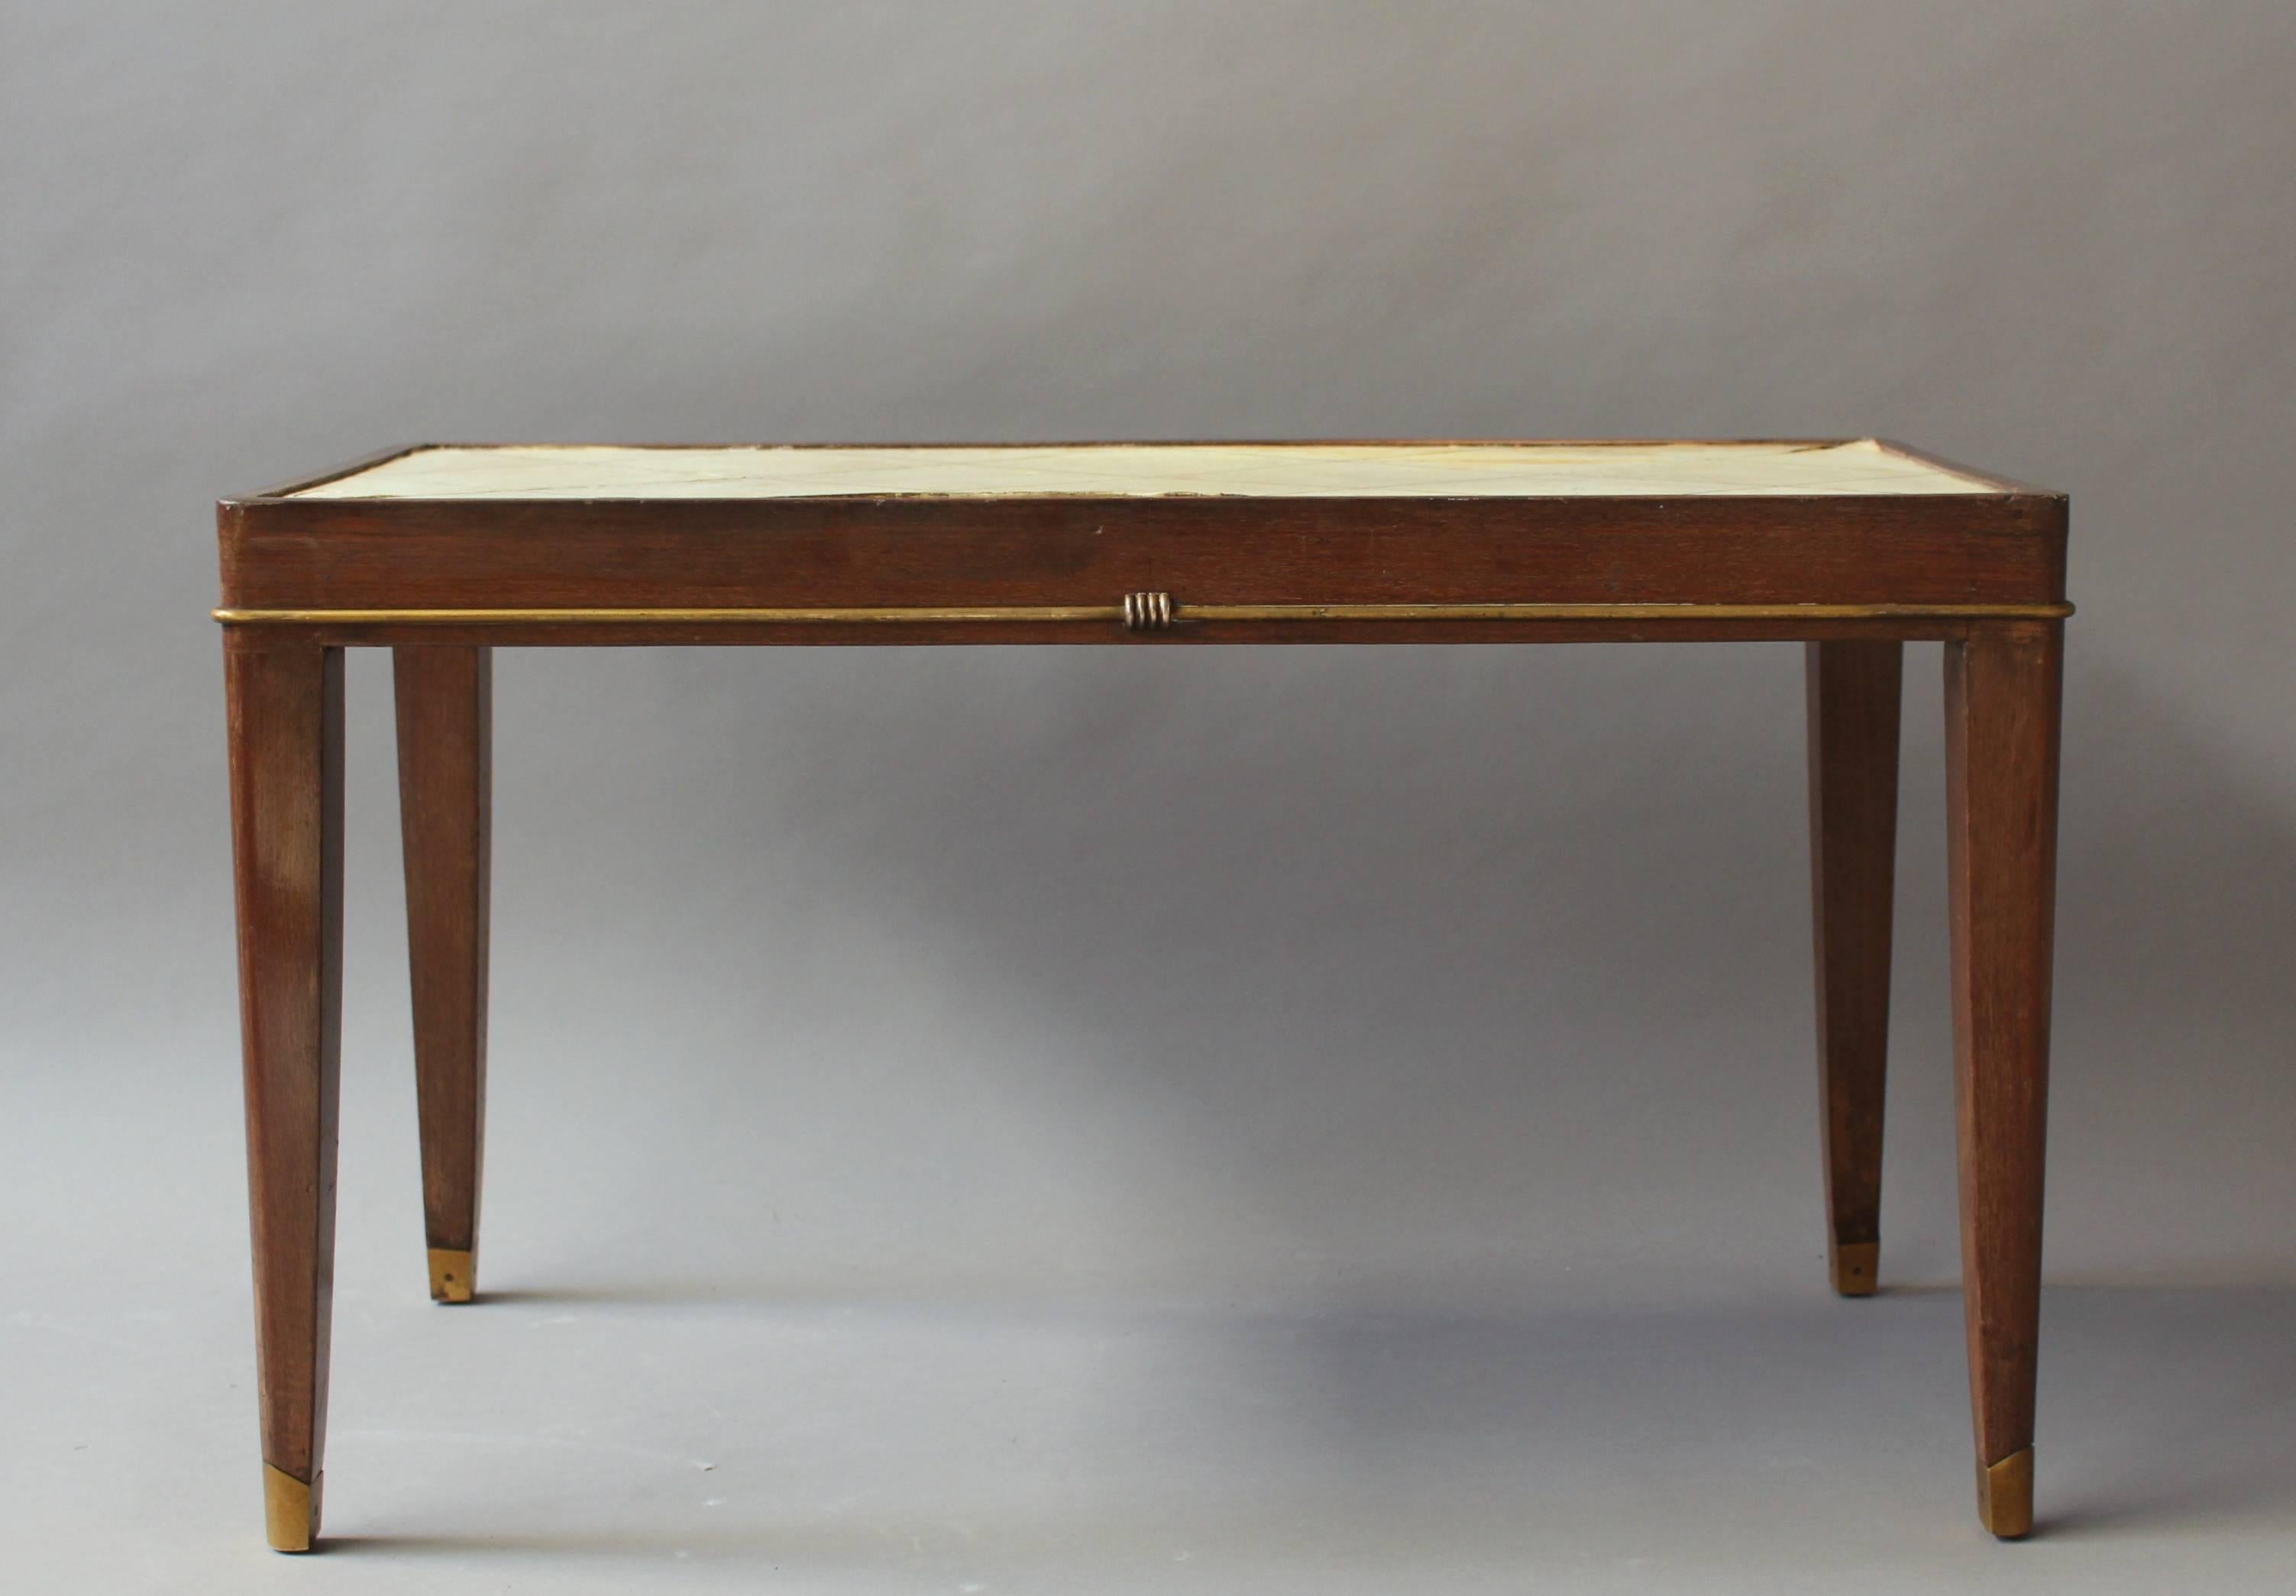 A fine French Art Deco mahogany coffee table with a parchment covered top and bronze details.